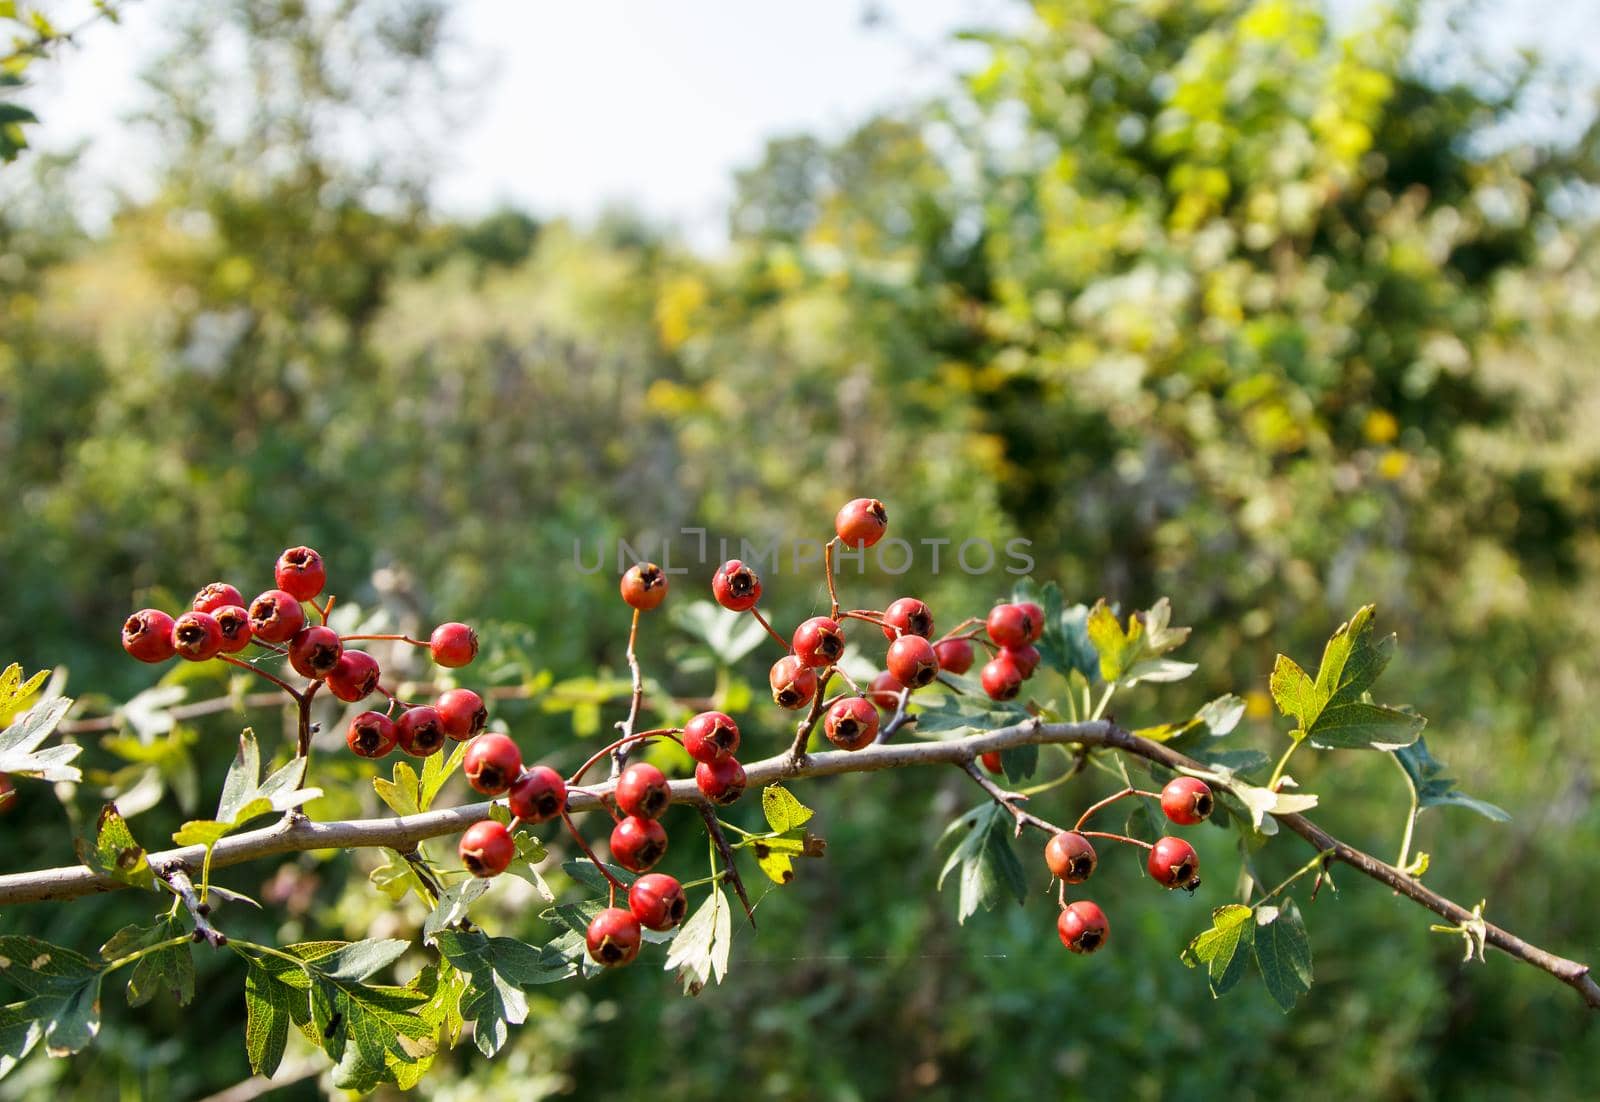 hawthorn fruit in the field on sunny autumn day. outdoor closeup